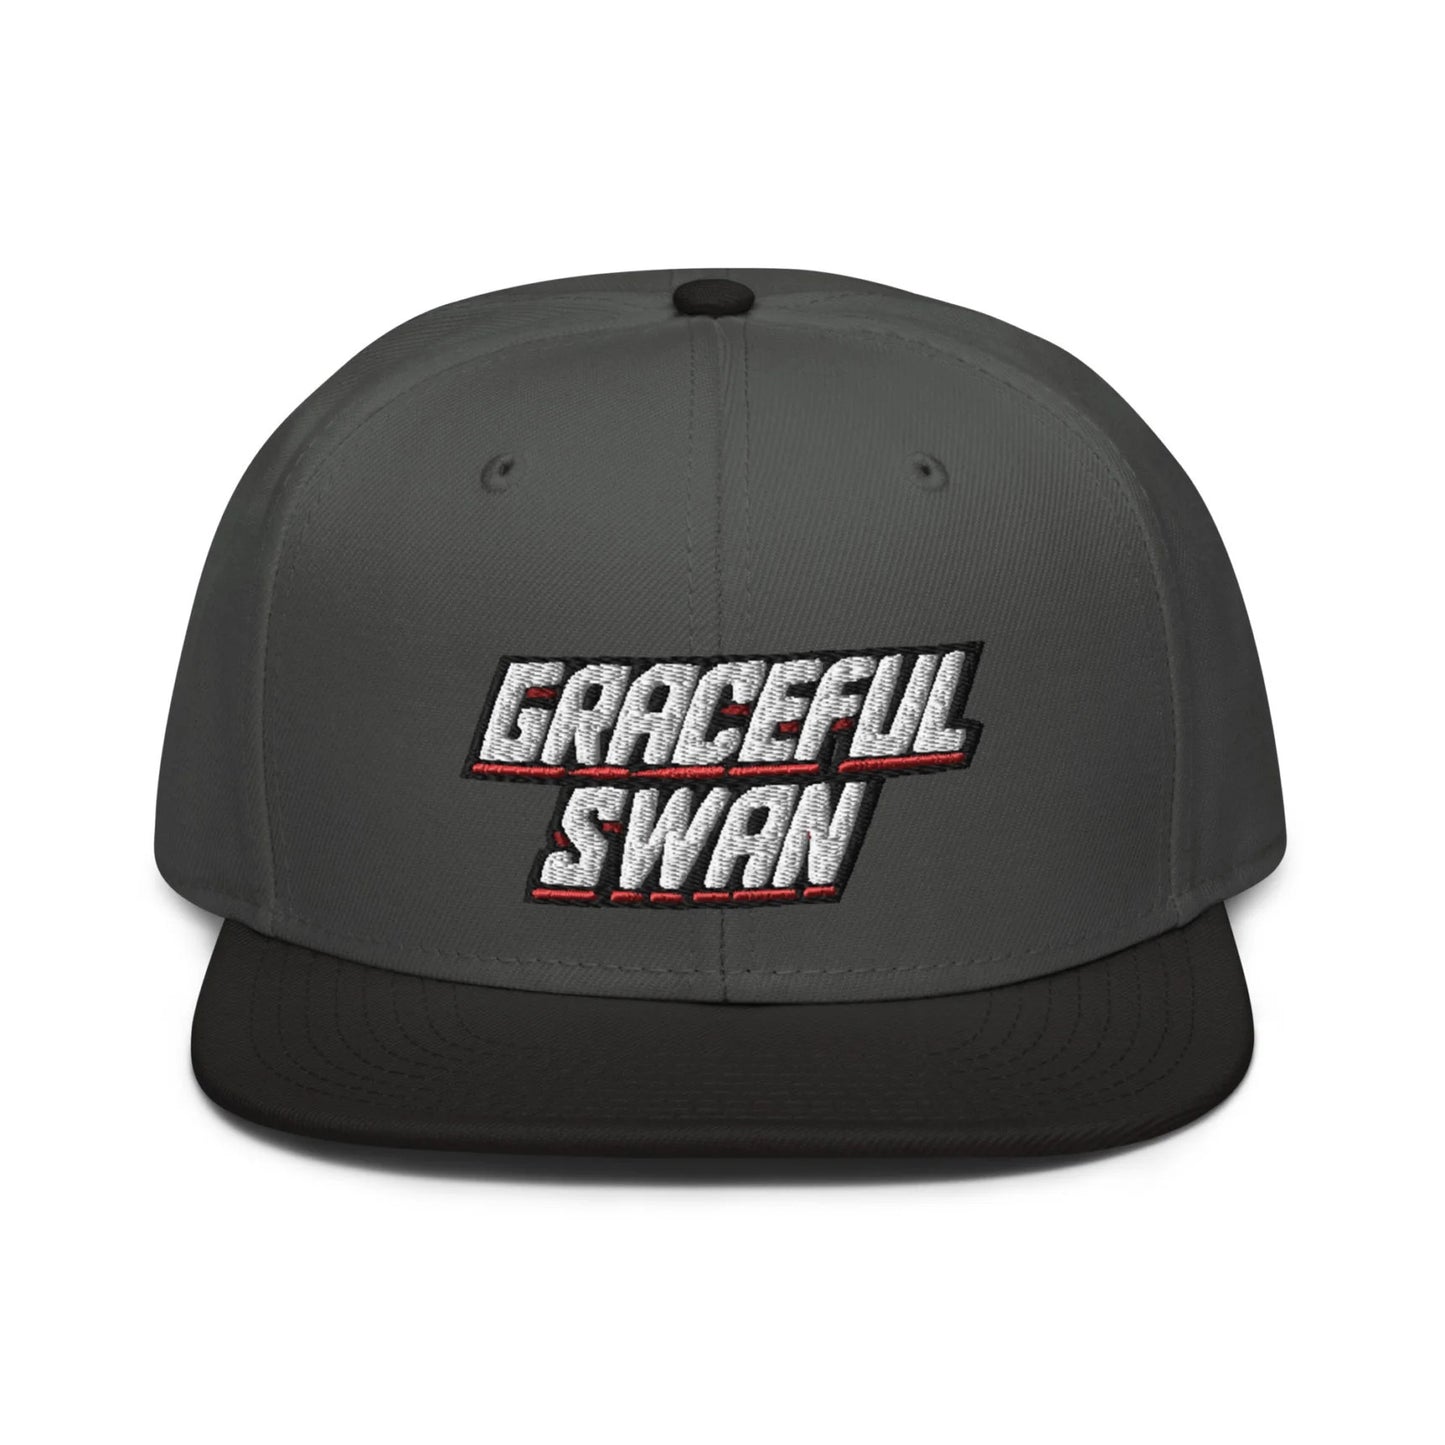 Graceful Swan ShowZone hat in charcoal grey with black brim and accents